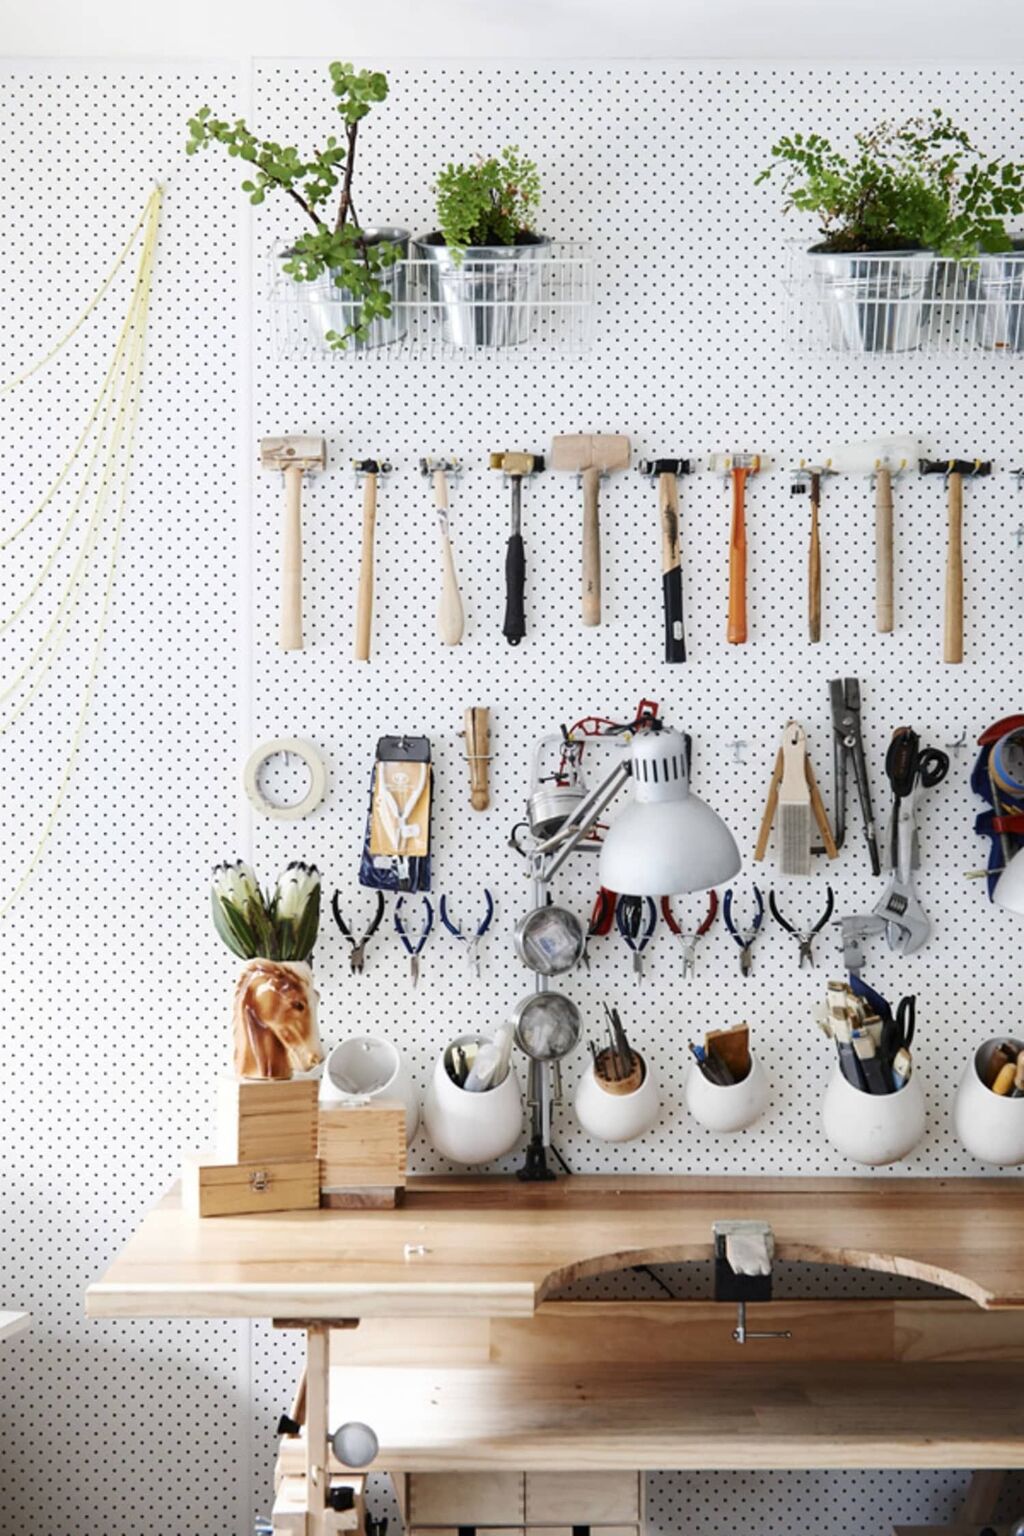 Get Organized with Pegboard to Maximize and Organize Your basement storage 